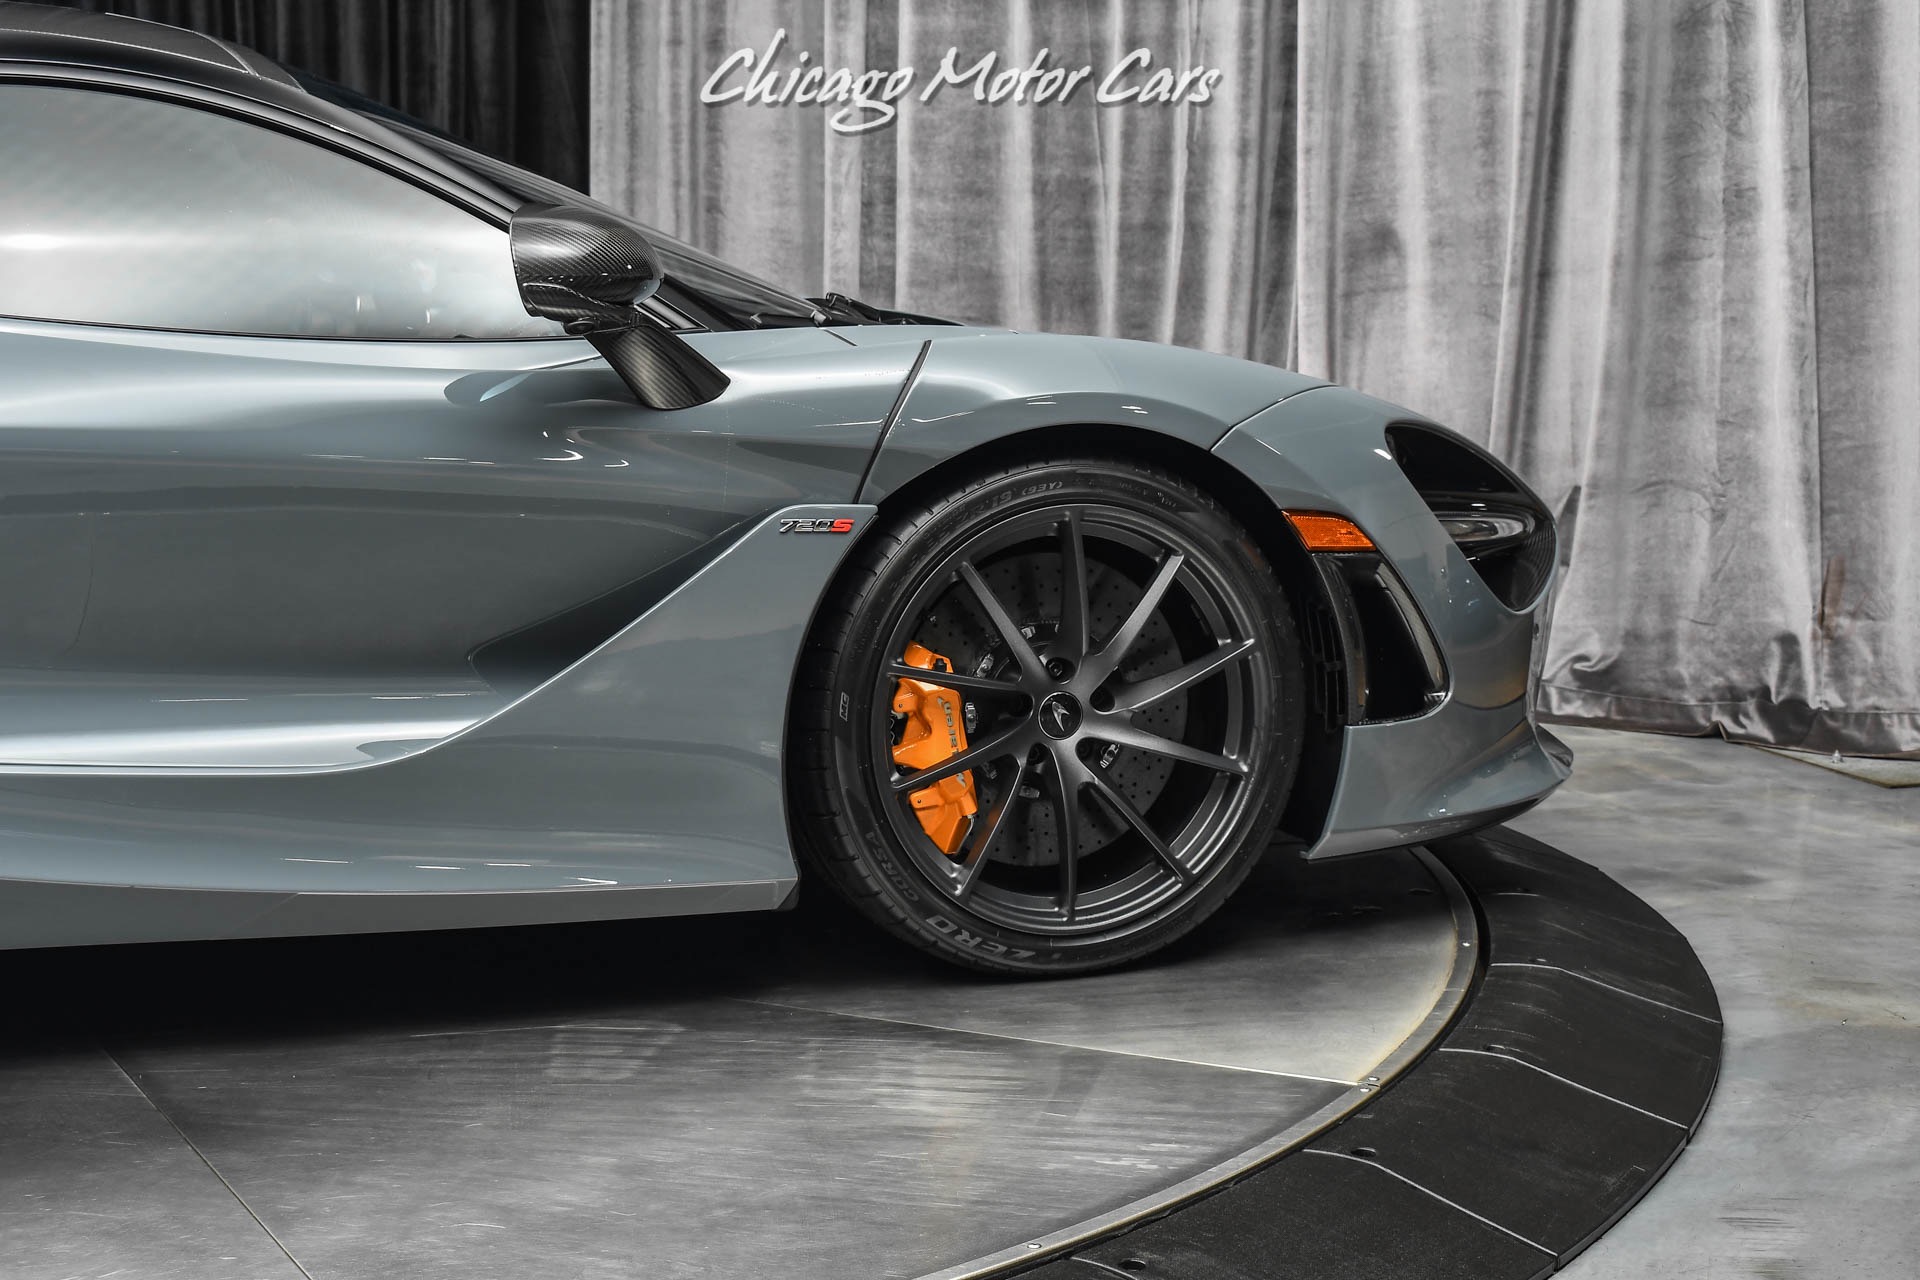 Used-2019-McLaren-720S-Performance-MSRP-426k-MSO-Chicane-Grey-FULL-PPF-LOADED-Only-900-Miles